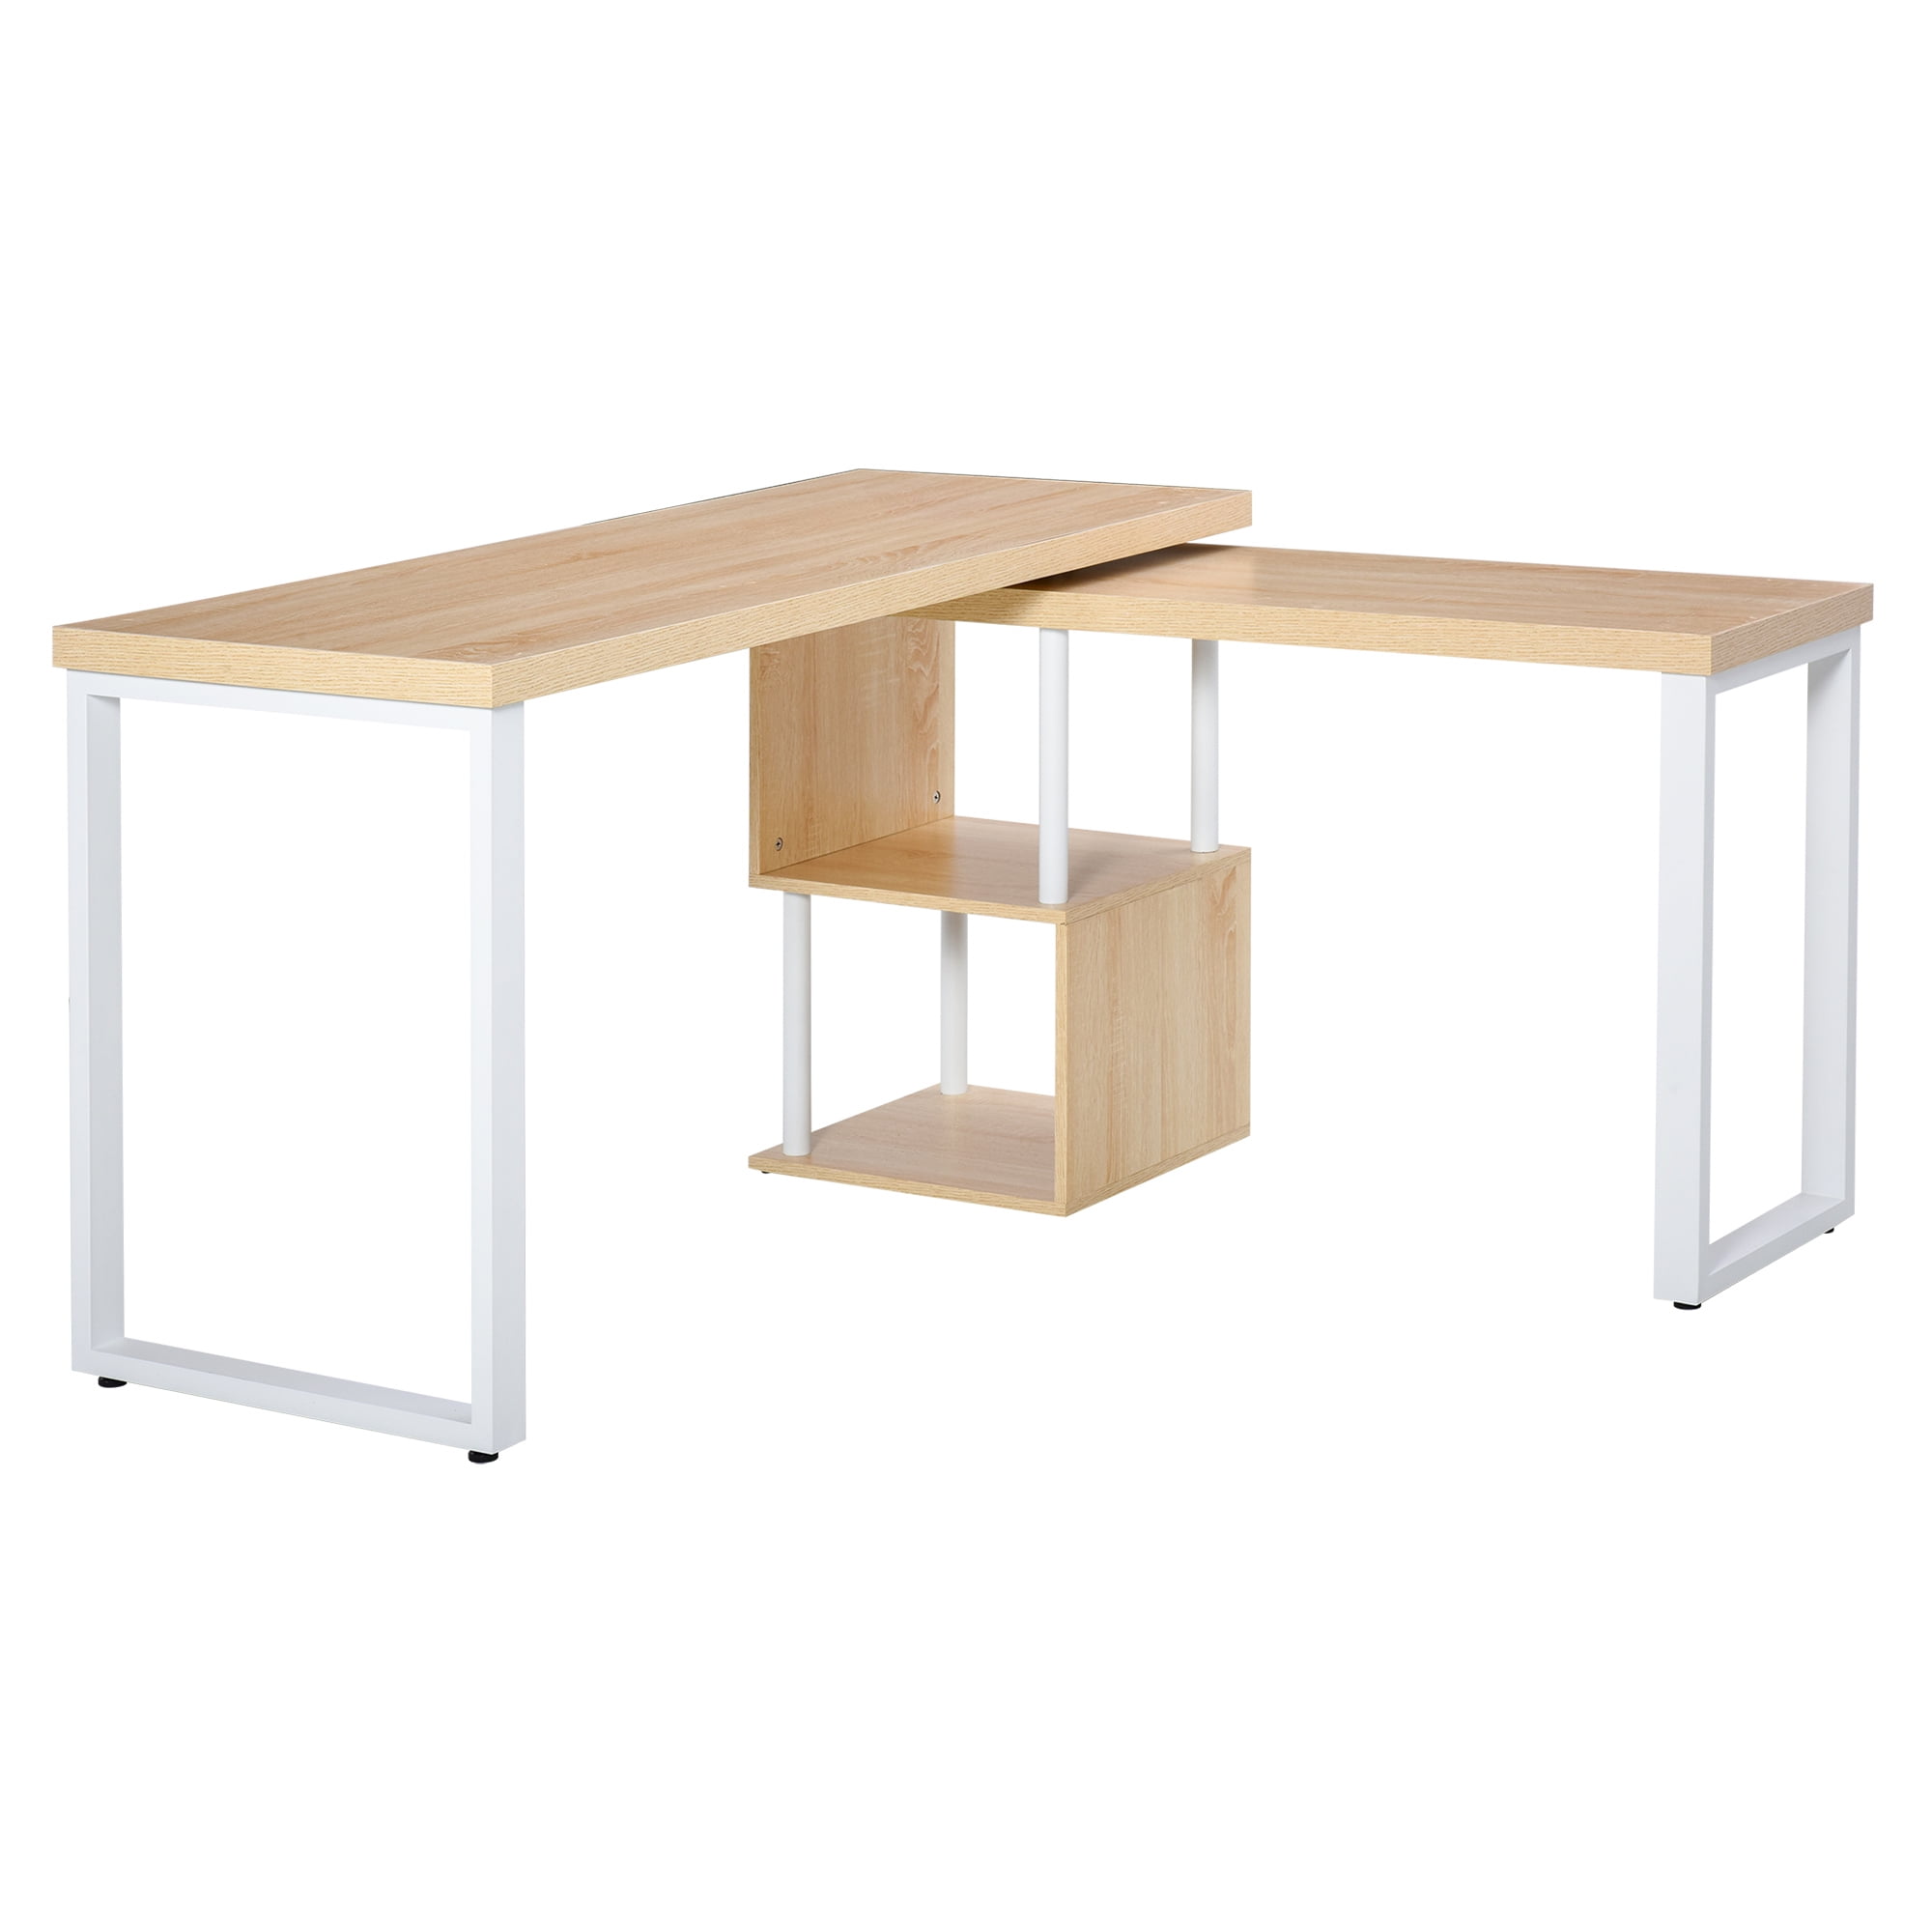 Details about   360° Rotating Corner Desk and Storage Shelf Combo L-Shaped Table Home Office 